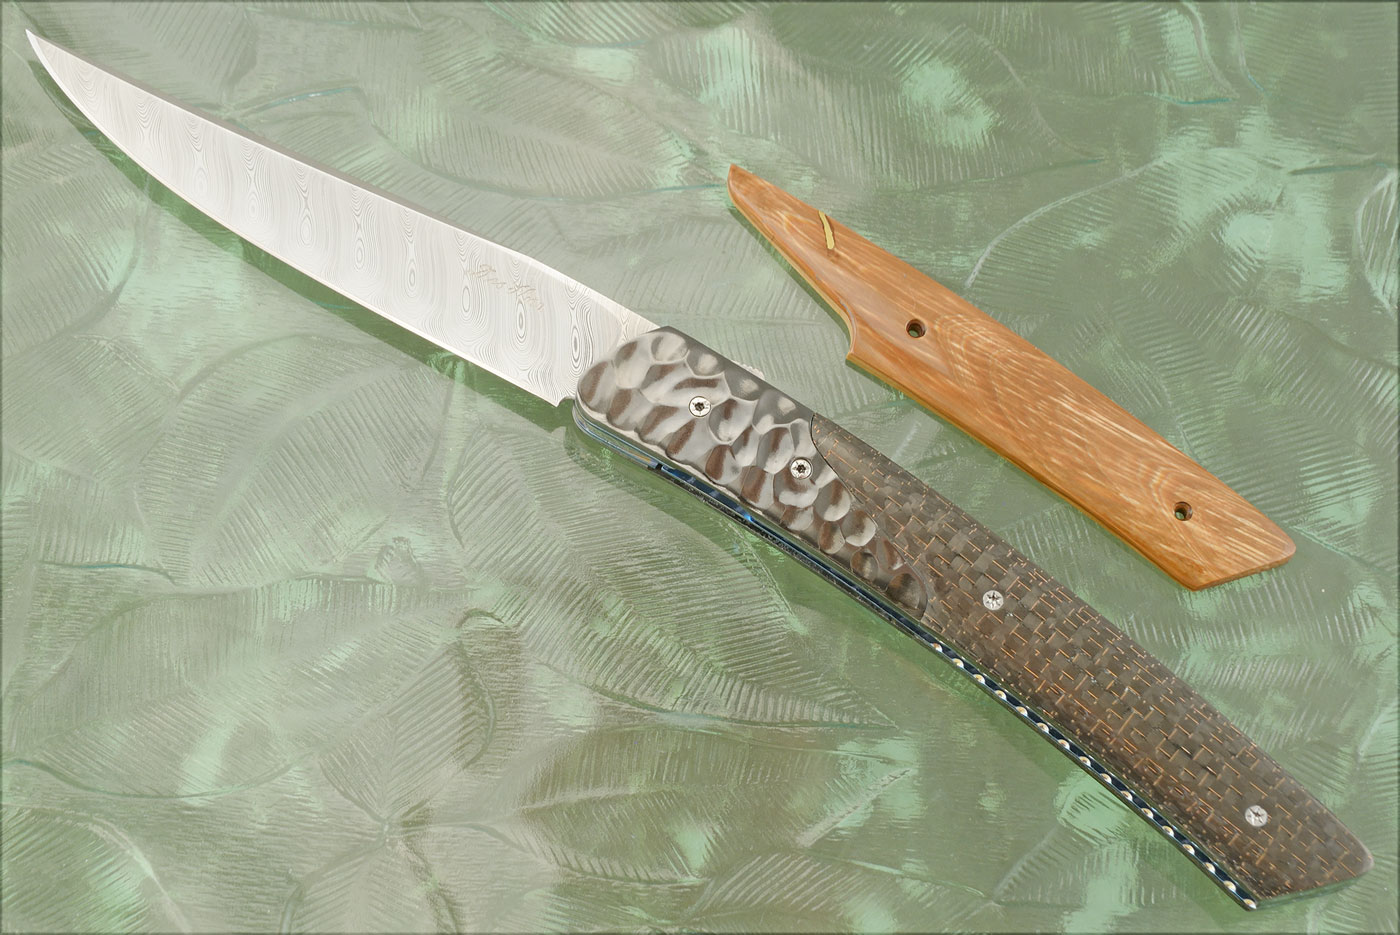 Thiers Model 10 Linerlock with Damasteel and Lighting Strike Carbon Fiber - Extra Mammoth Ivory Scales Included!